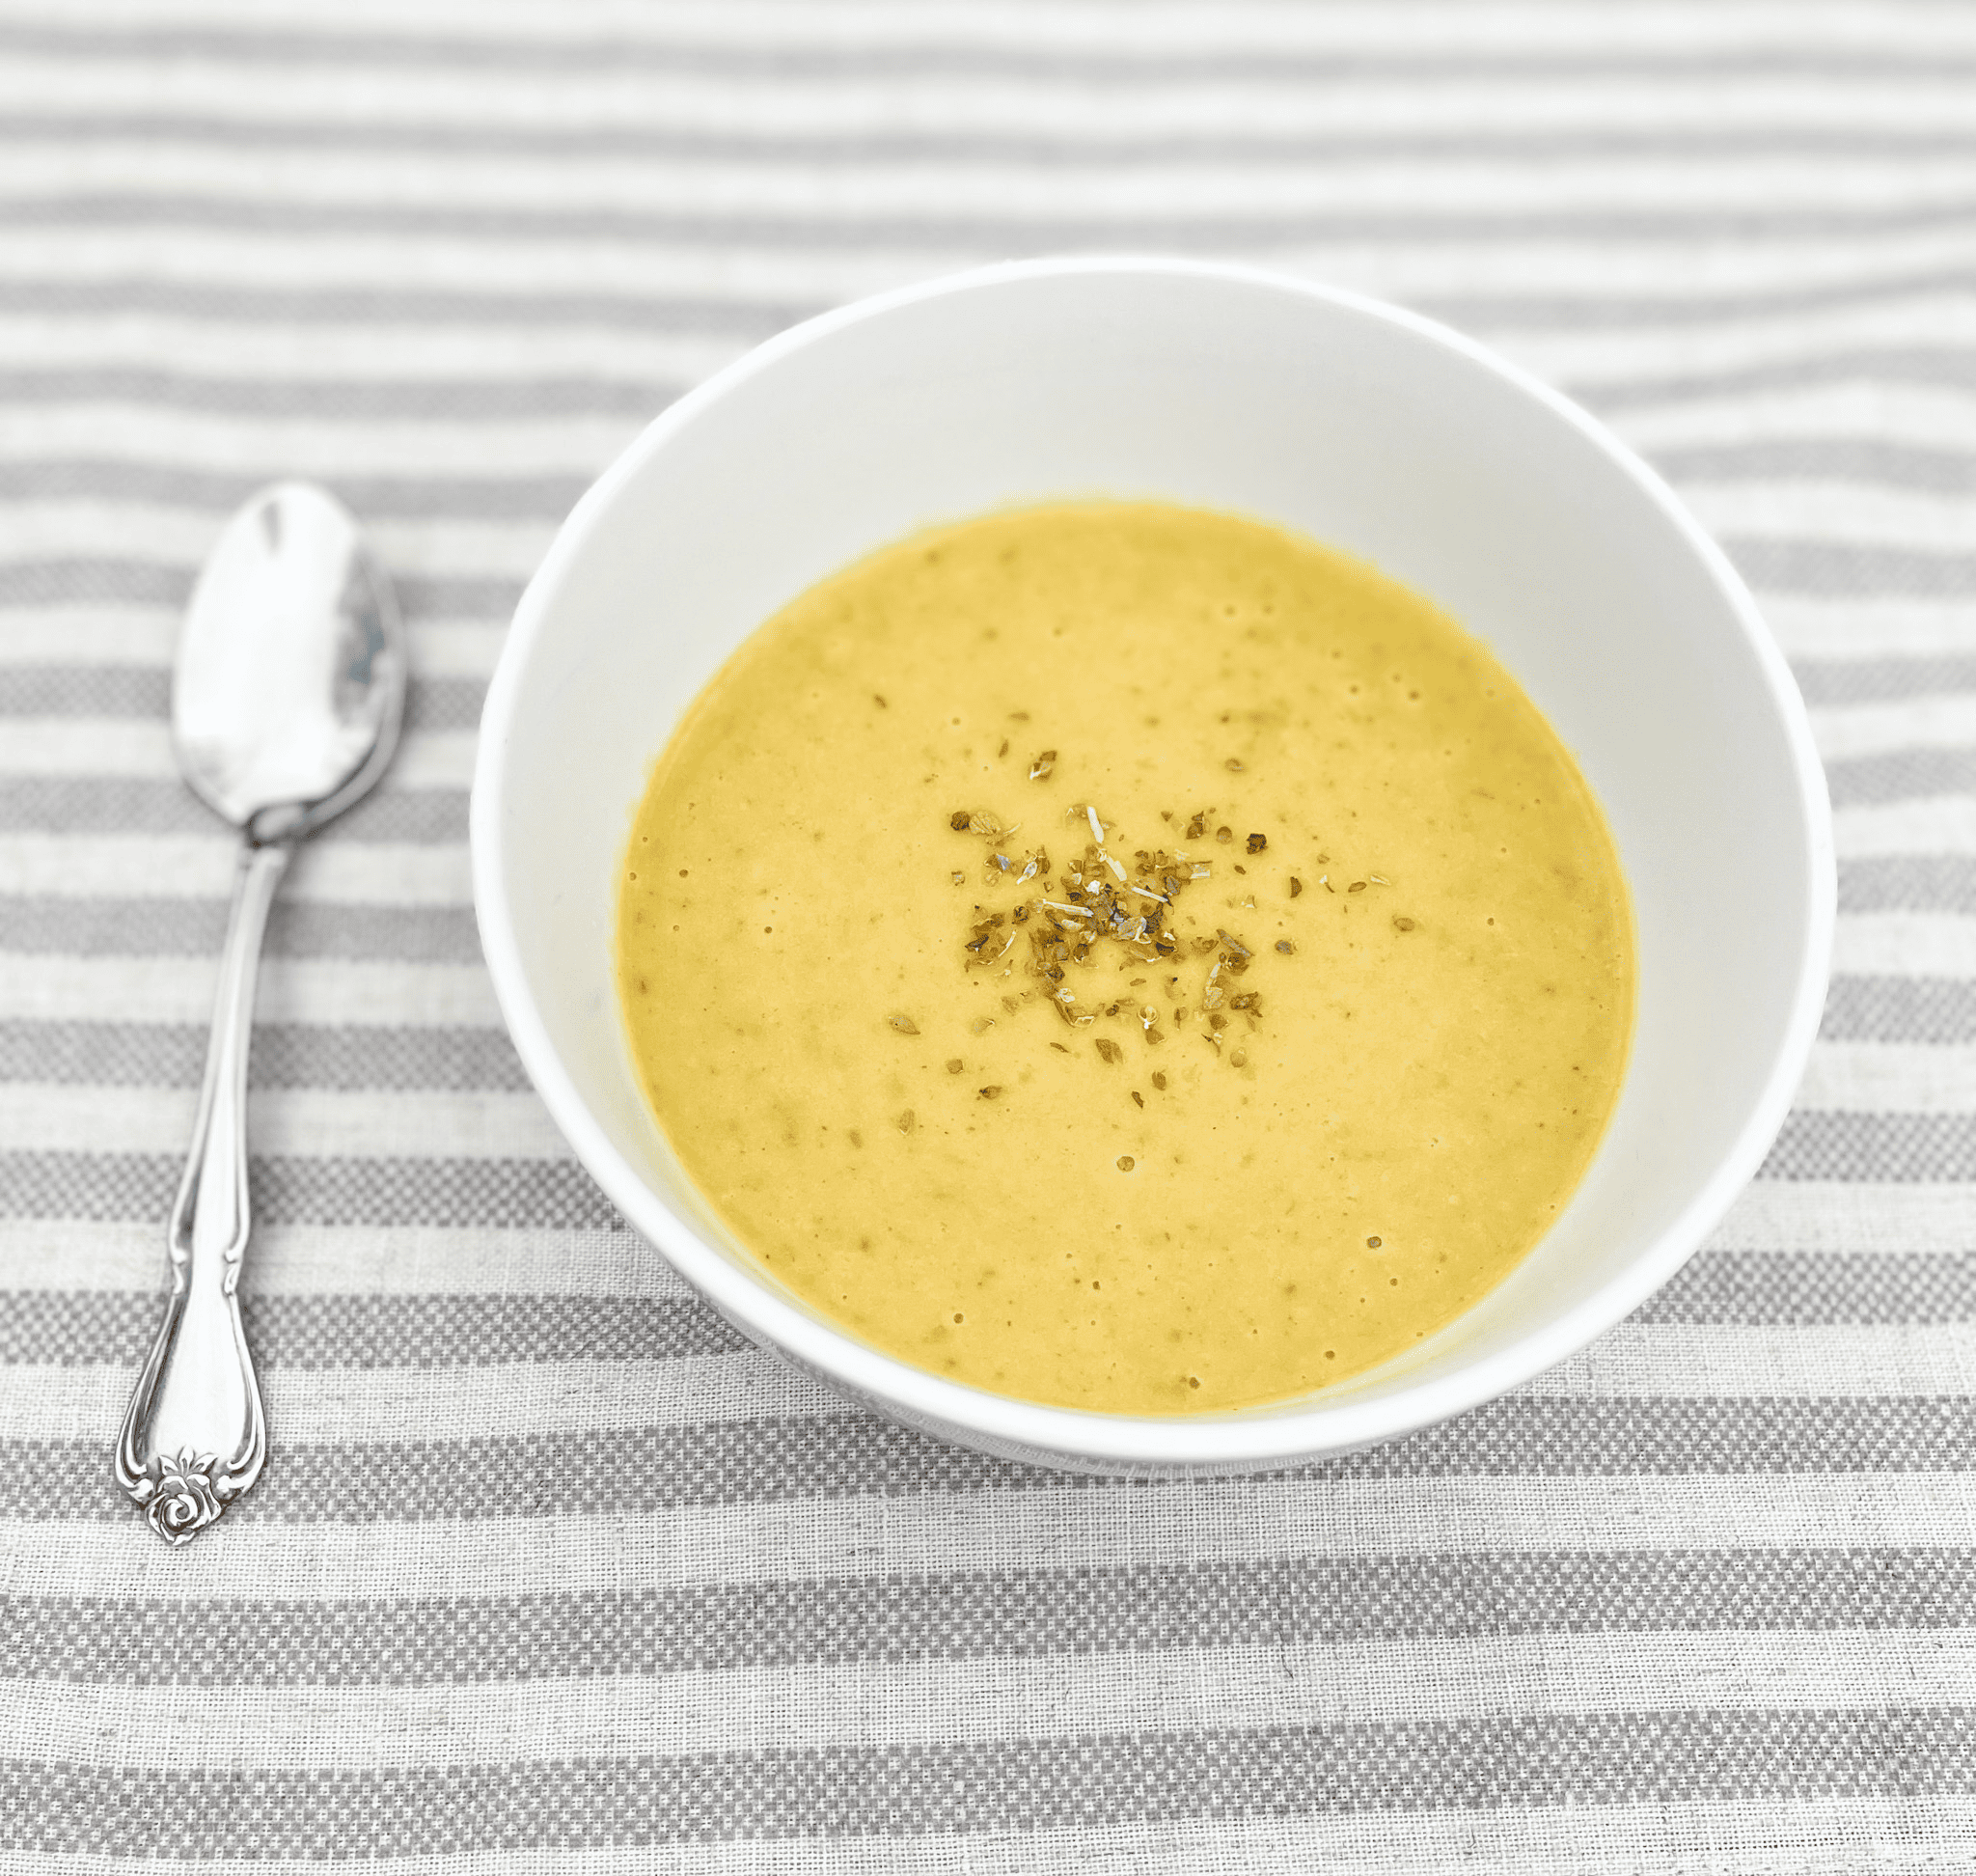 52 Clove Golden Garlic Soup Recipe for Colds and Flu